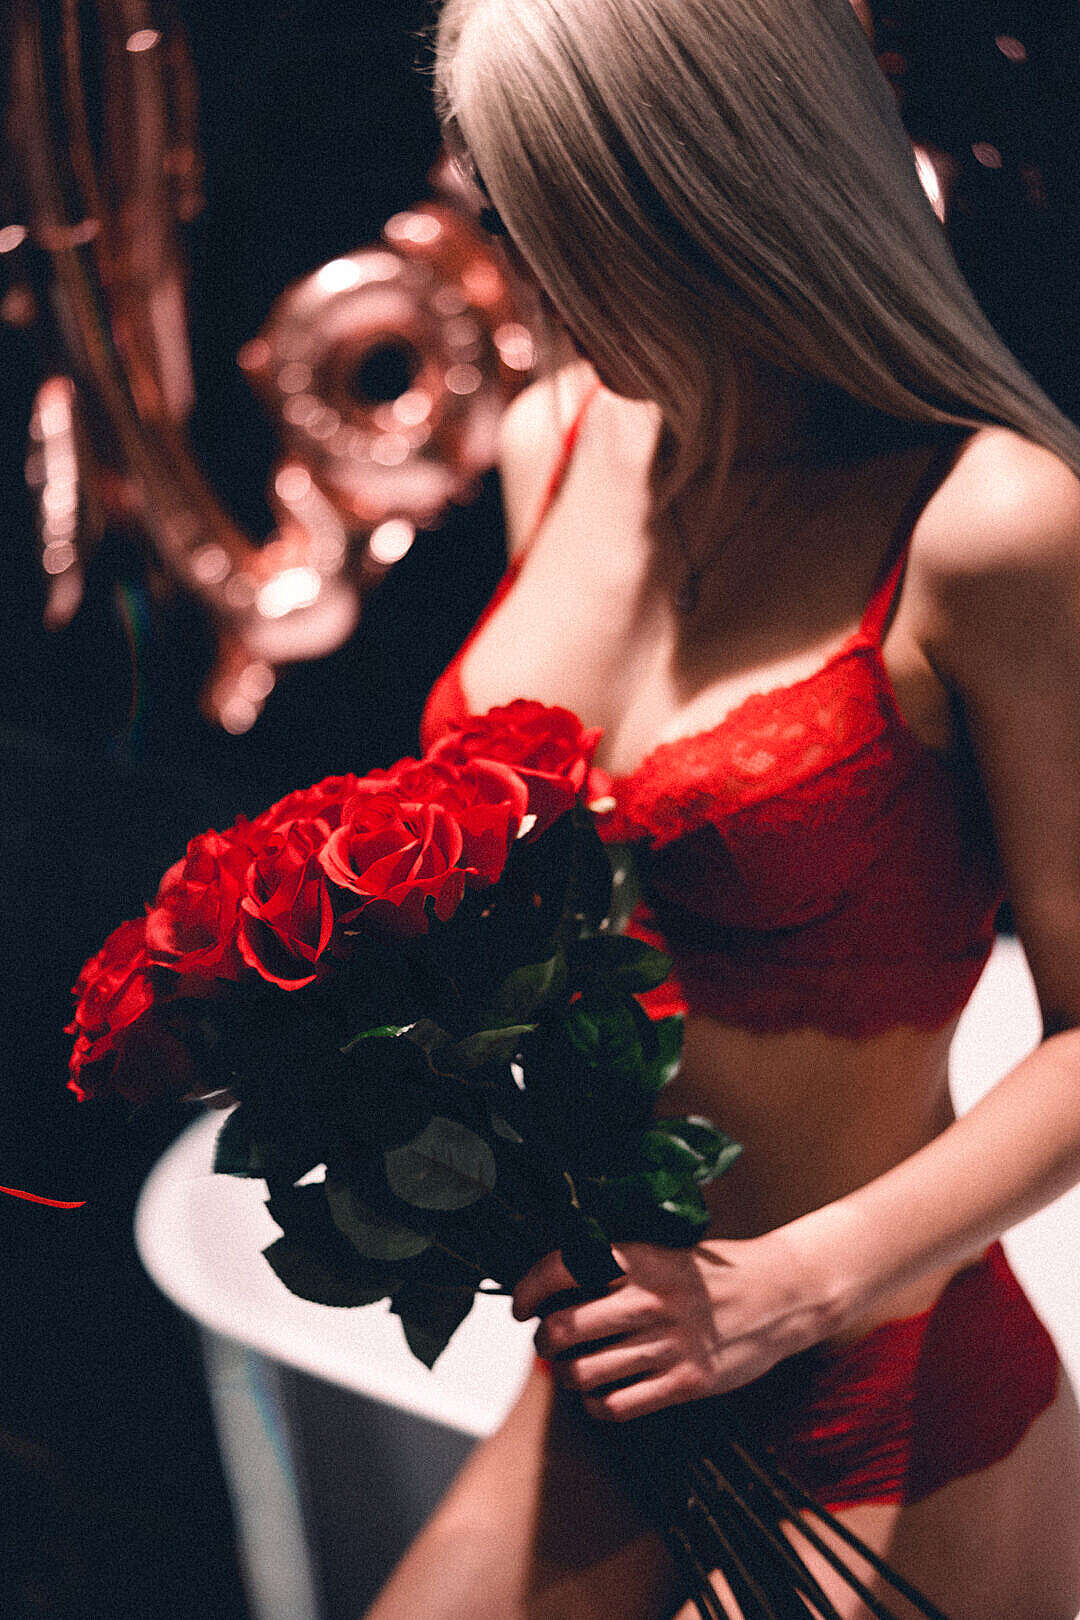 Download Woman in Red Lace Lingerie Holding a Bouquet of Roses FREE Stock Photo